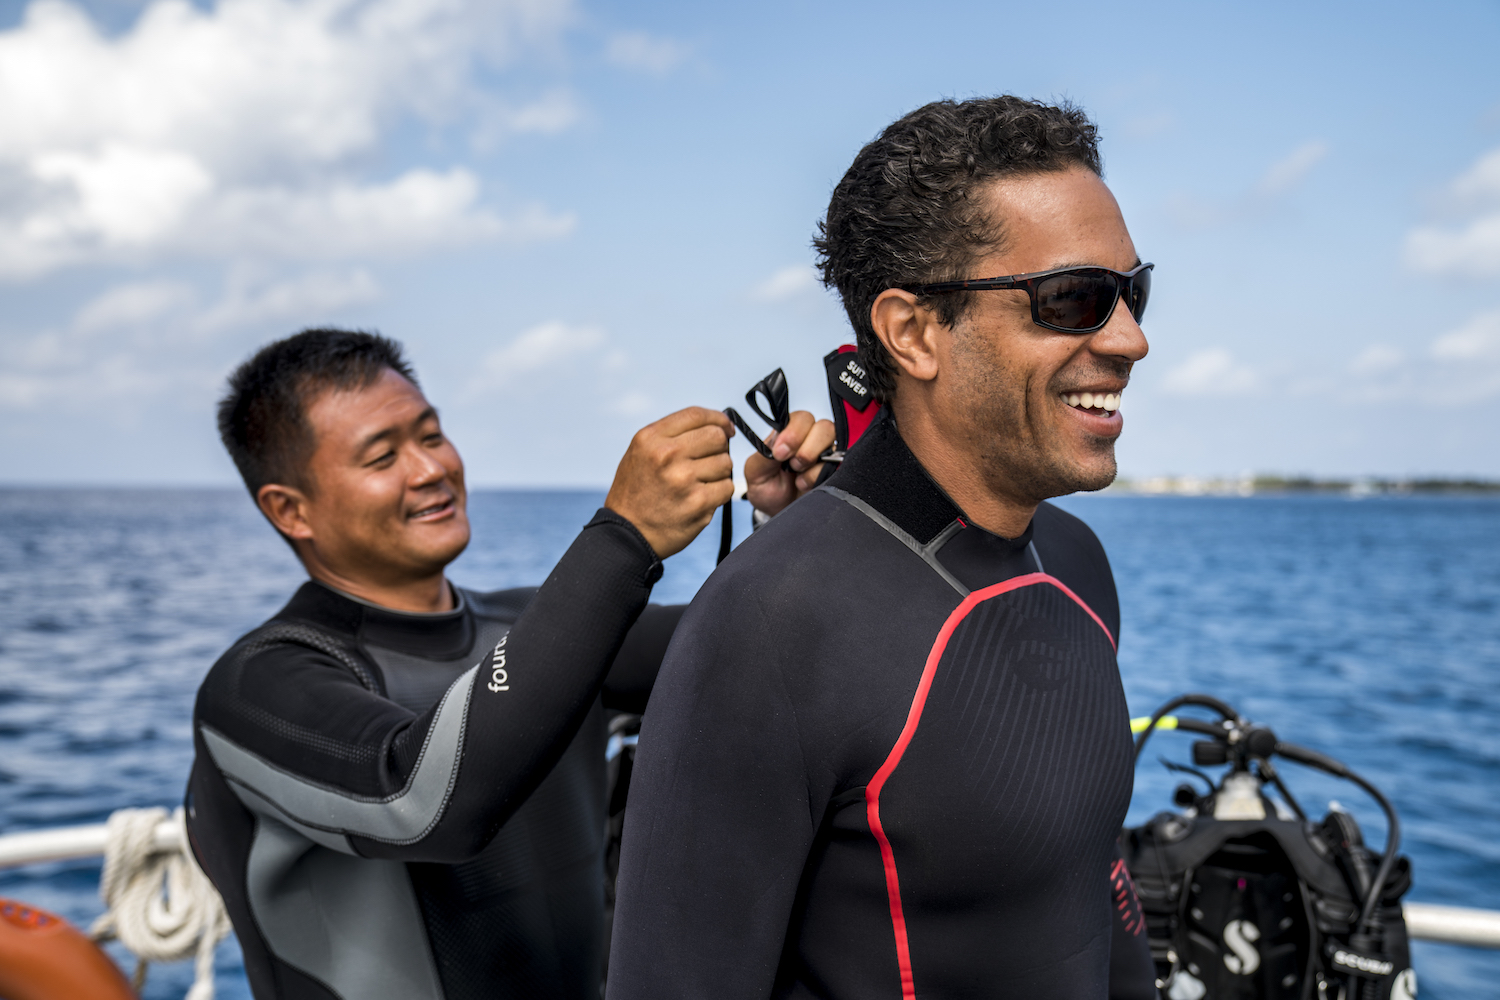 A scuba diver helping his buddy put on his wetsuit, a useful distraction for a way how to get over anxiety when scuba diving